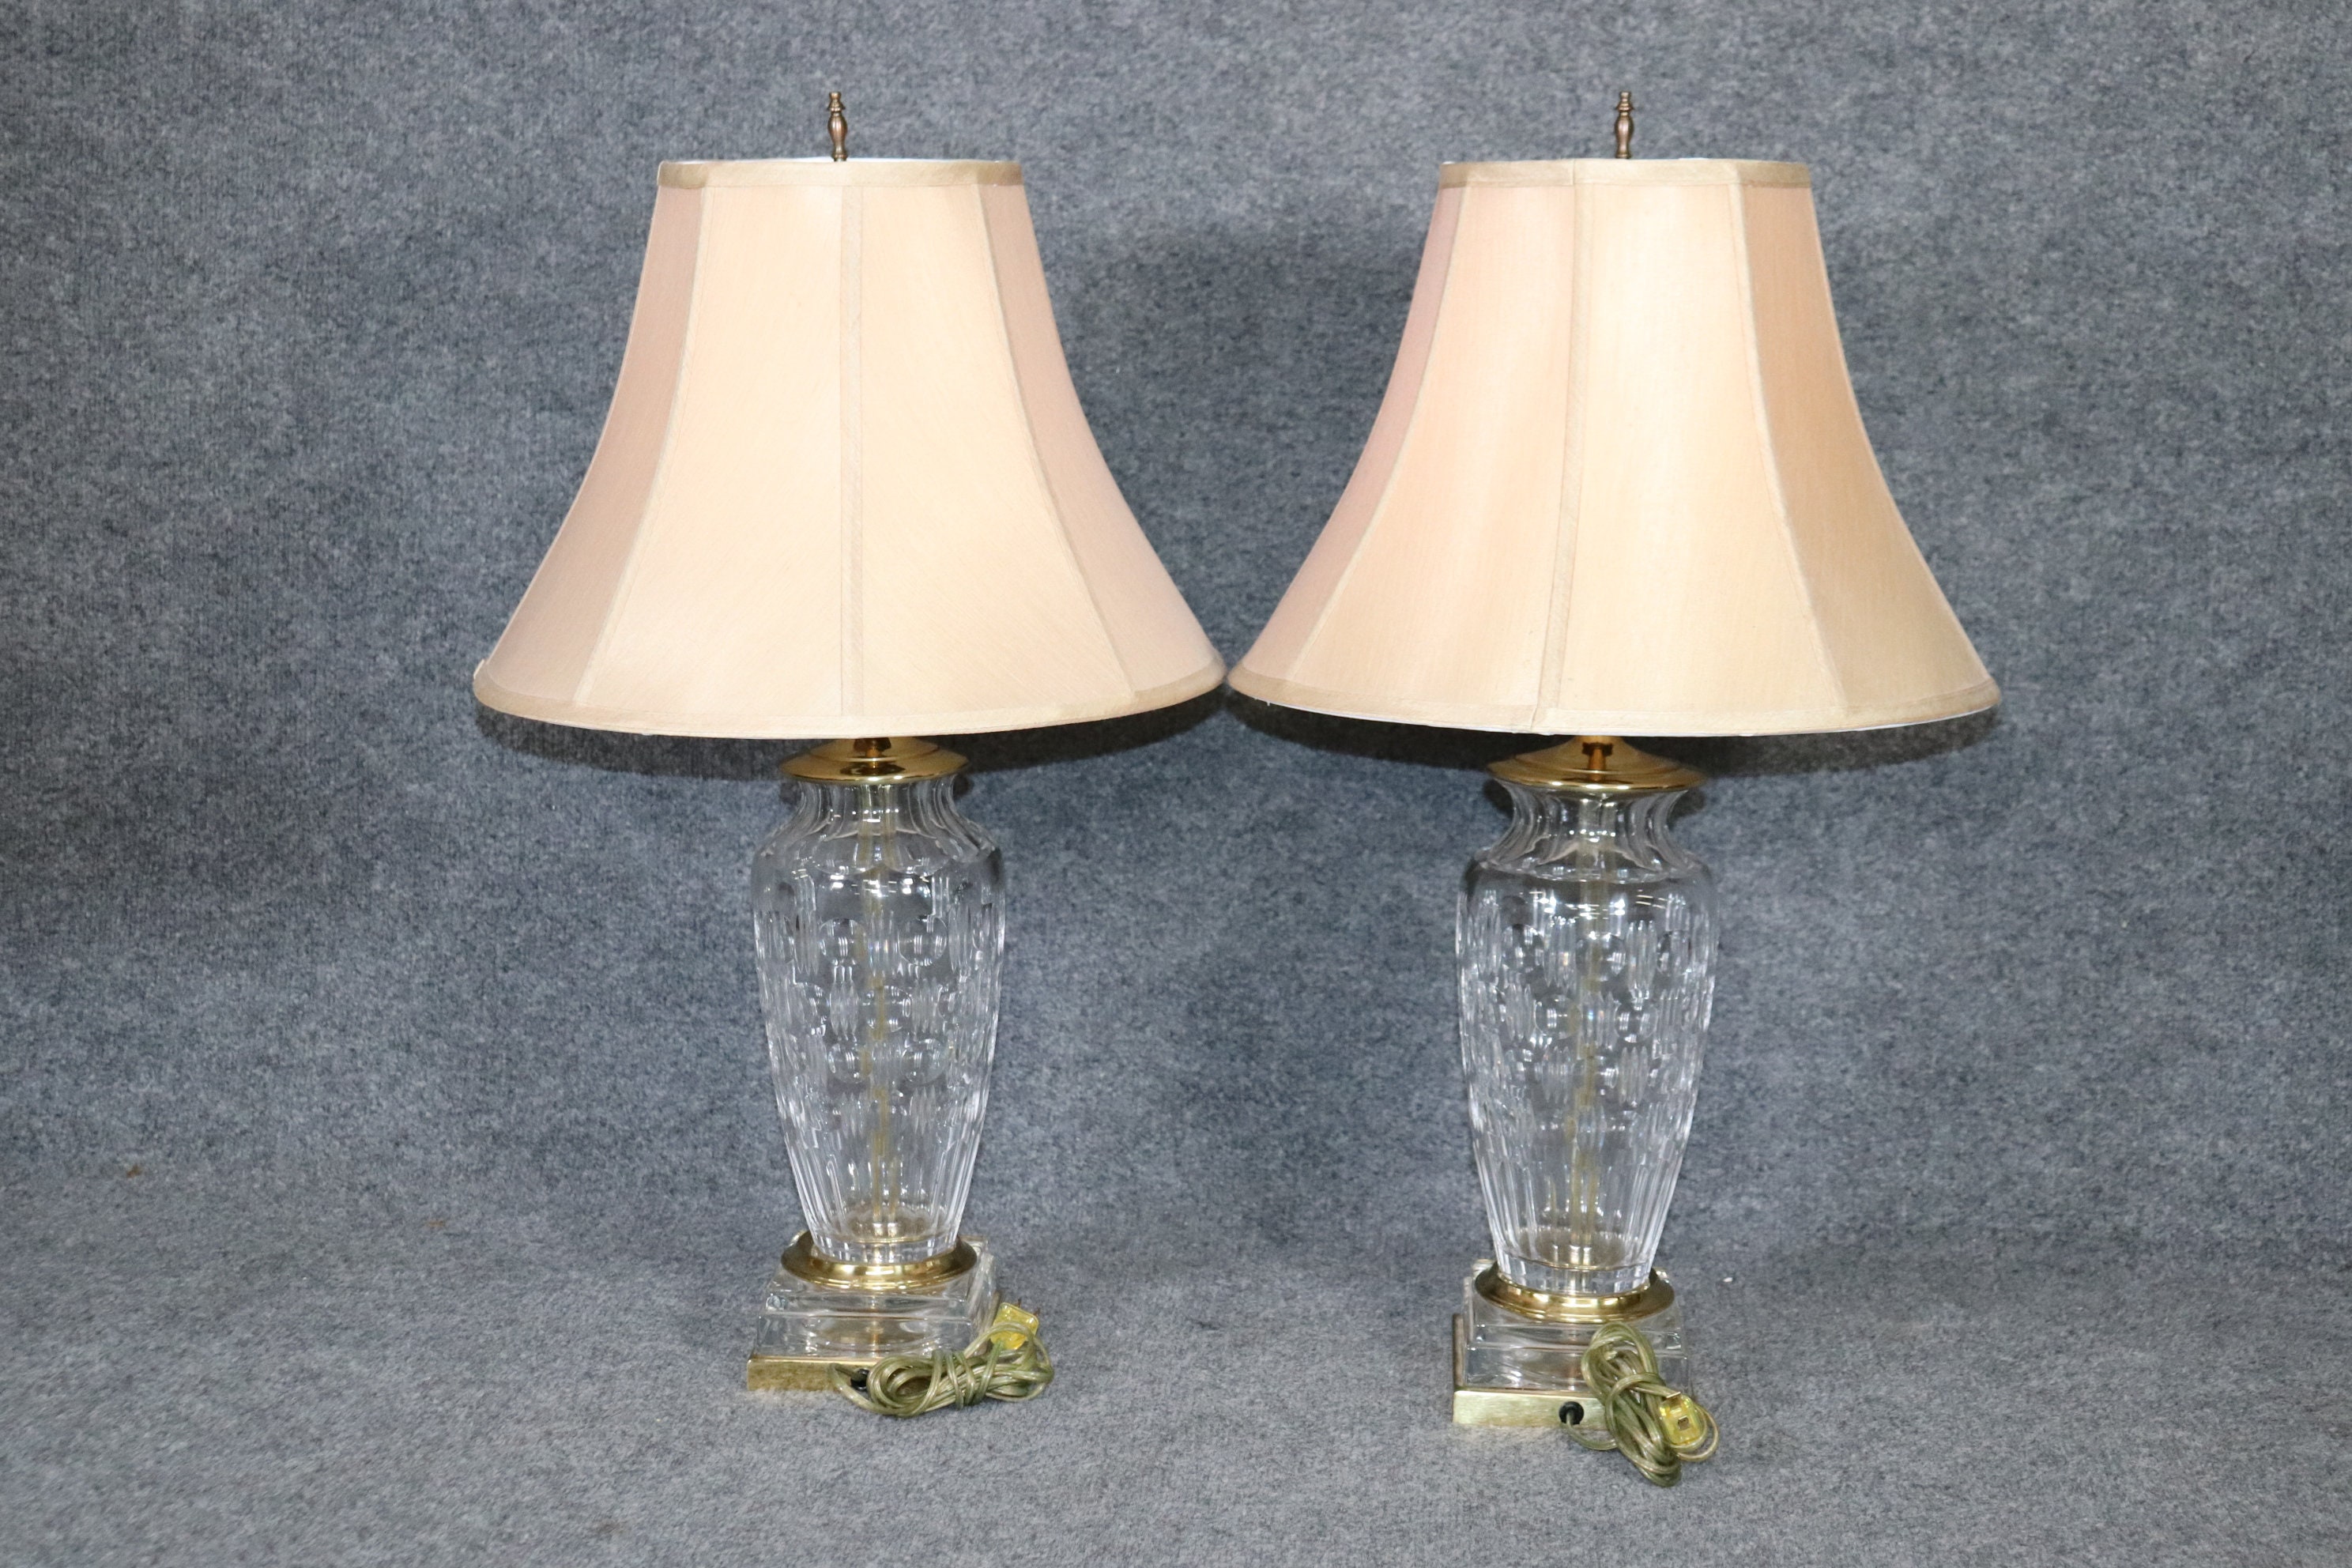 Pair of Crystal and Brass Lamps Attributed to Waterford, Pair of